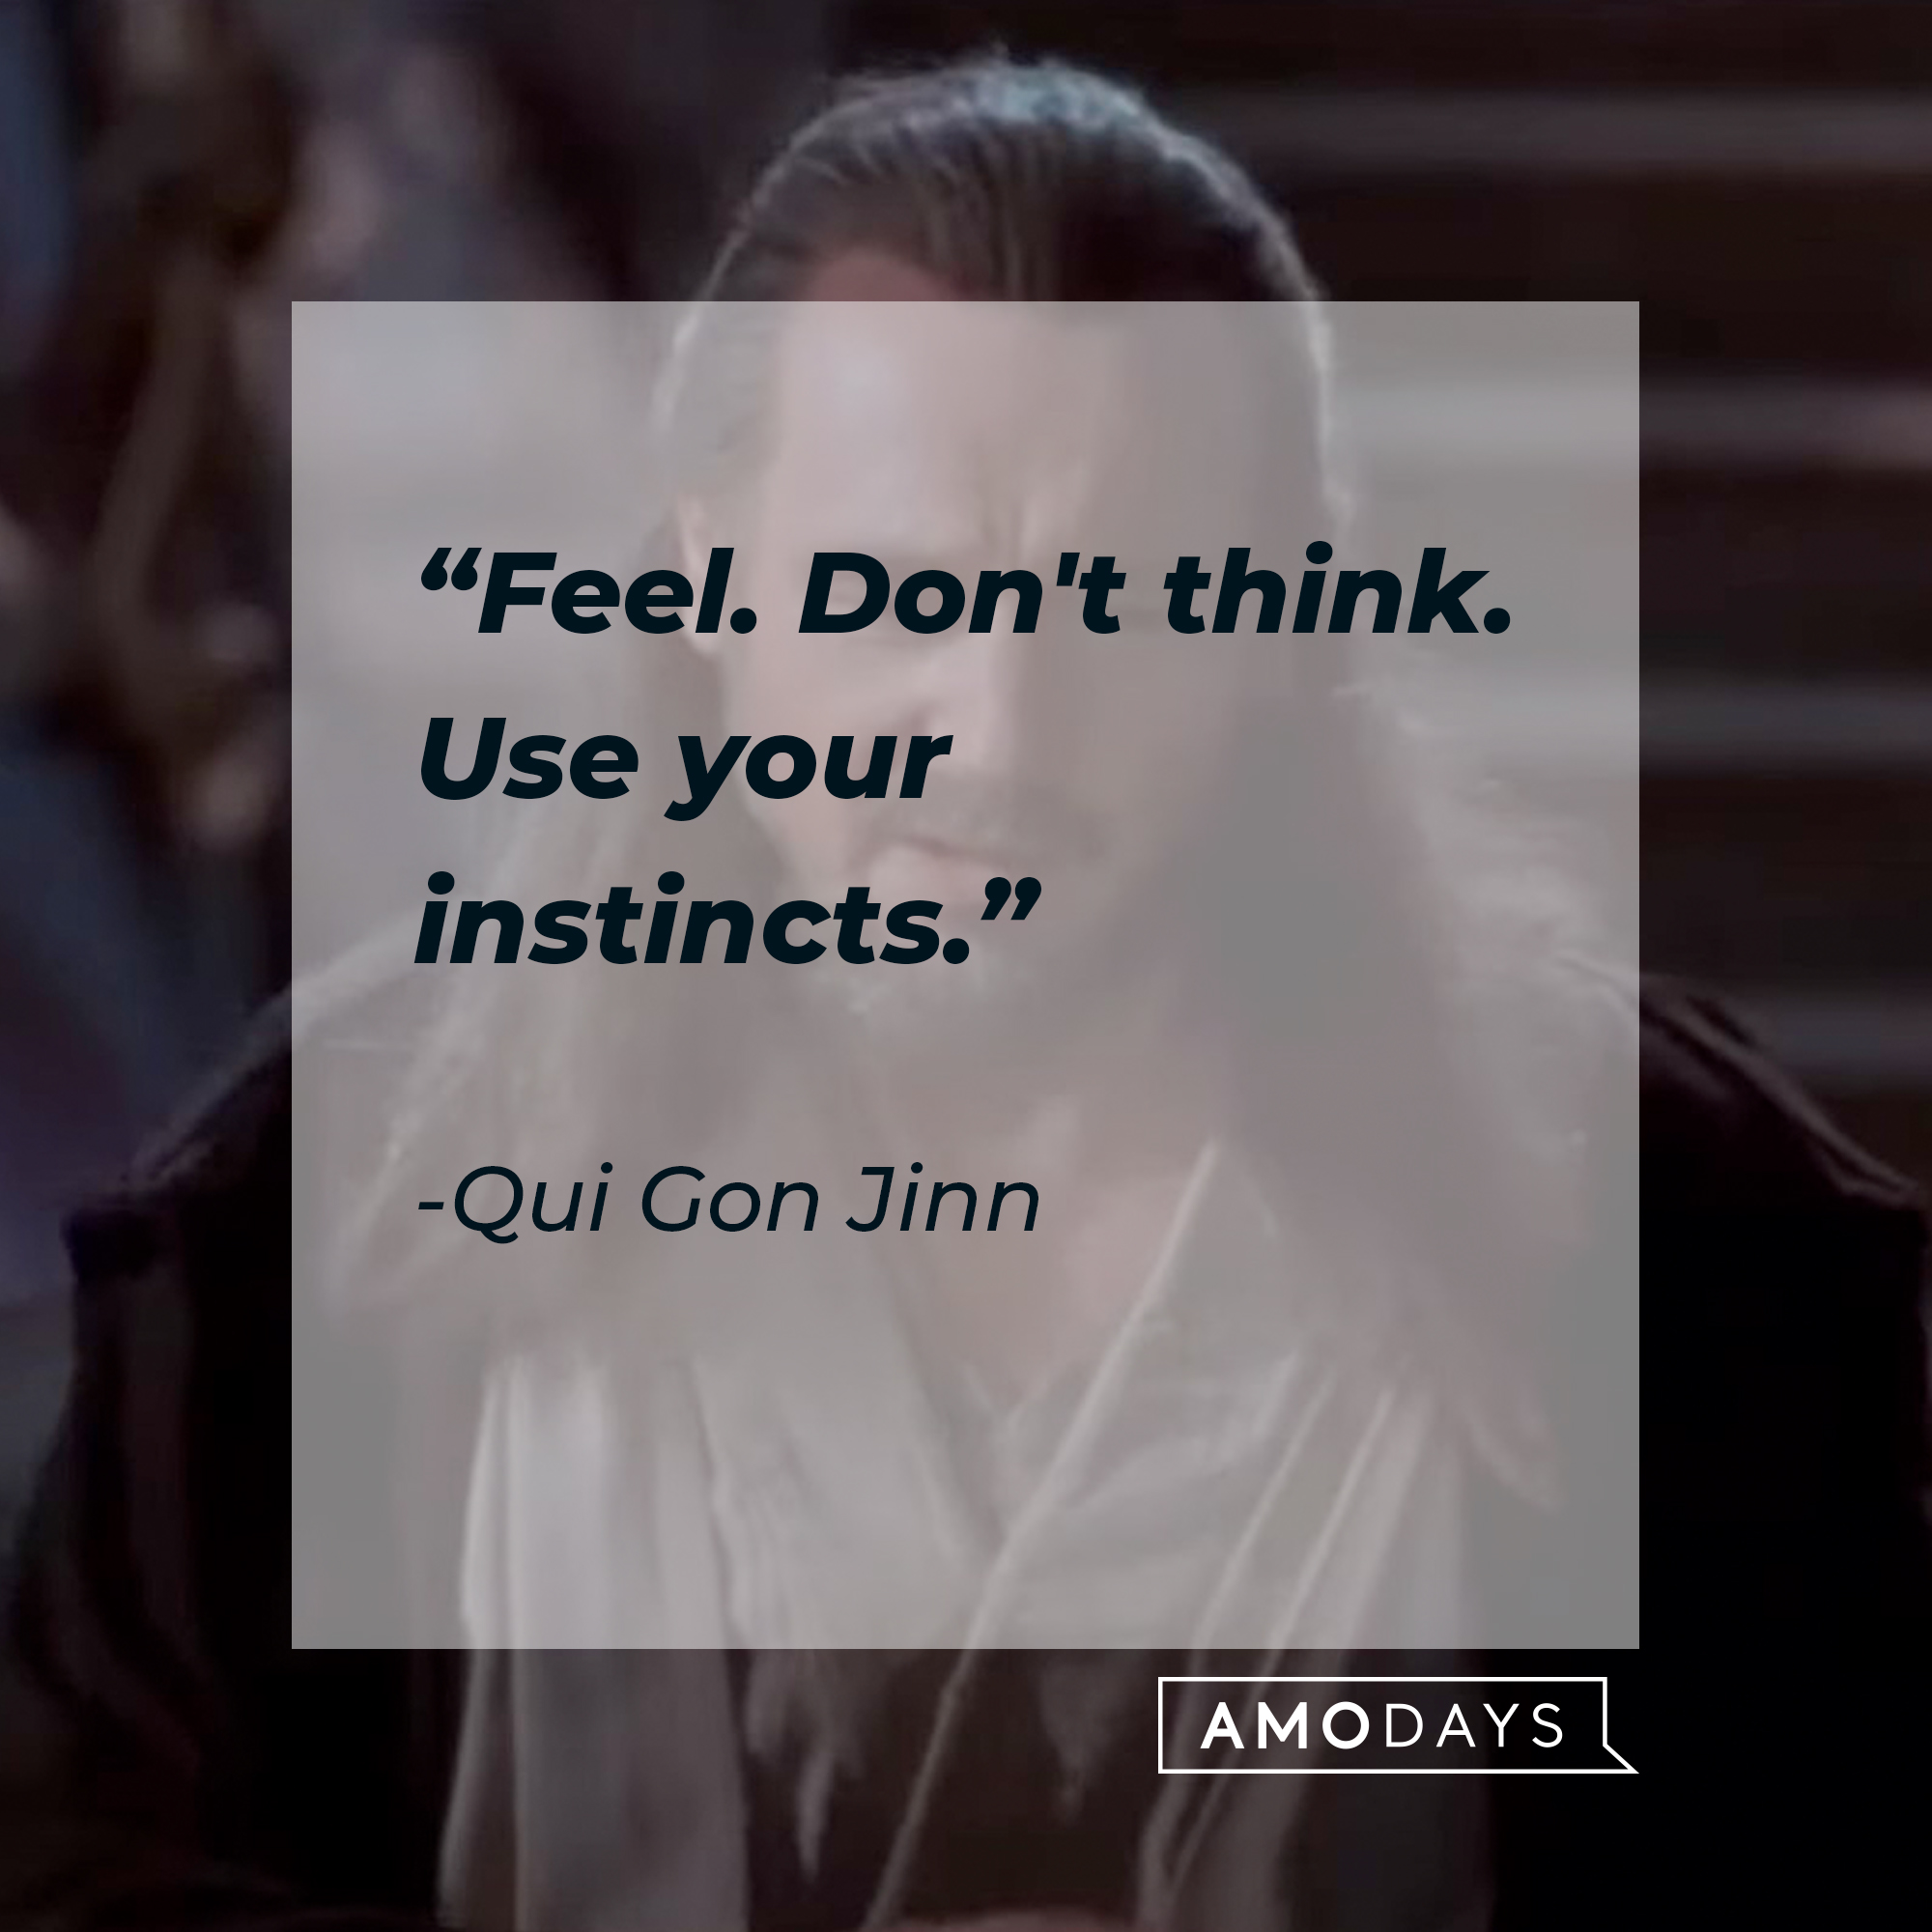 A picture of Qui Gon Jinn with a quote by him: “Feel. Don't think. Use your instincts.” | Source: facebook.com/StarWars